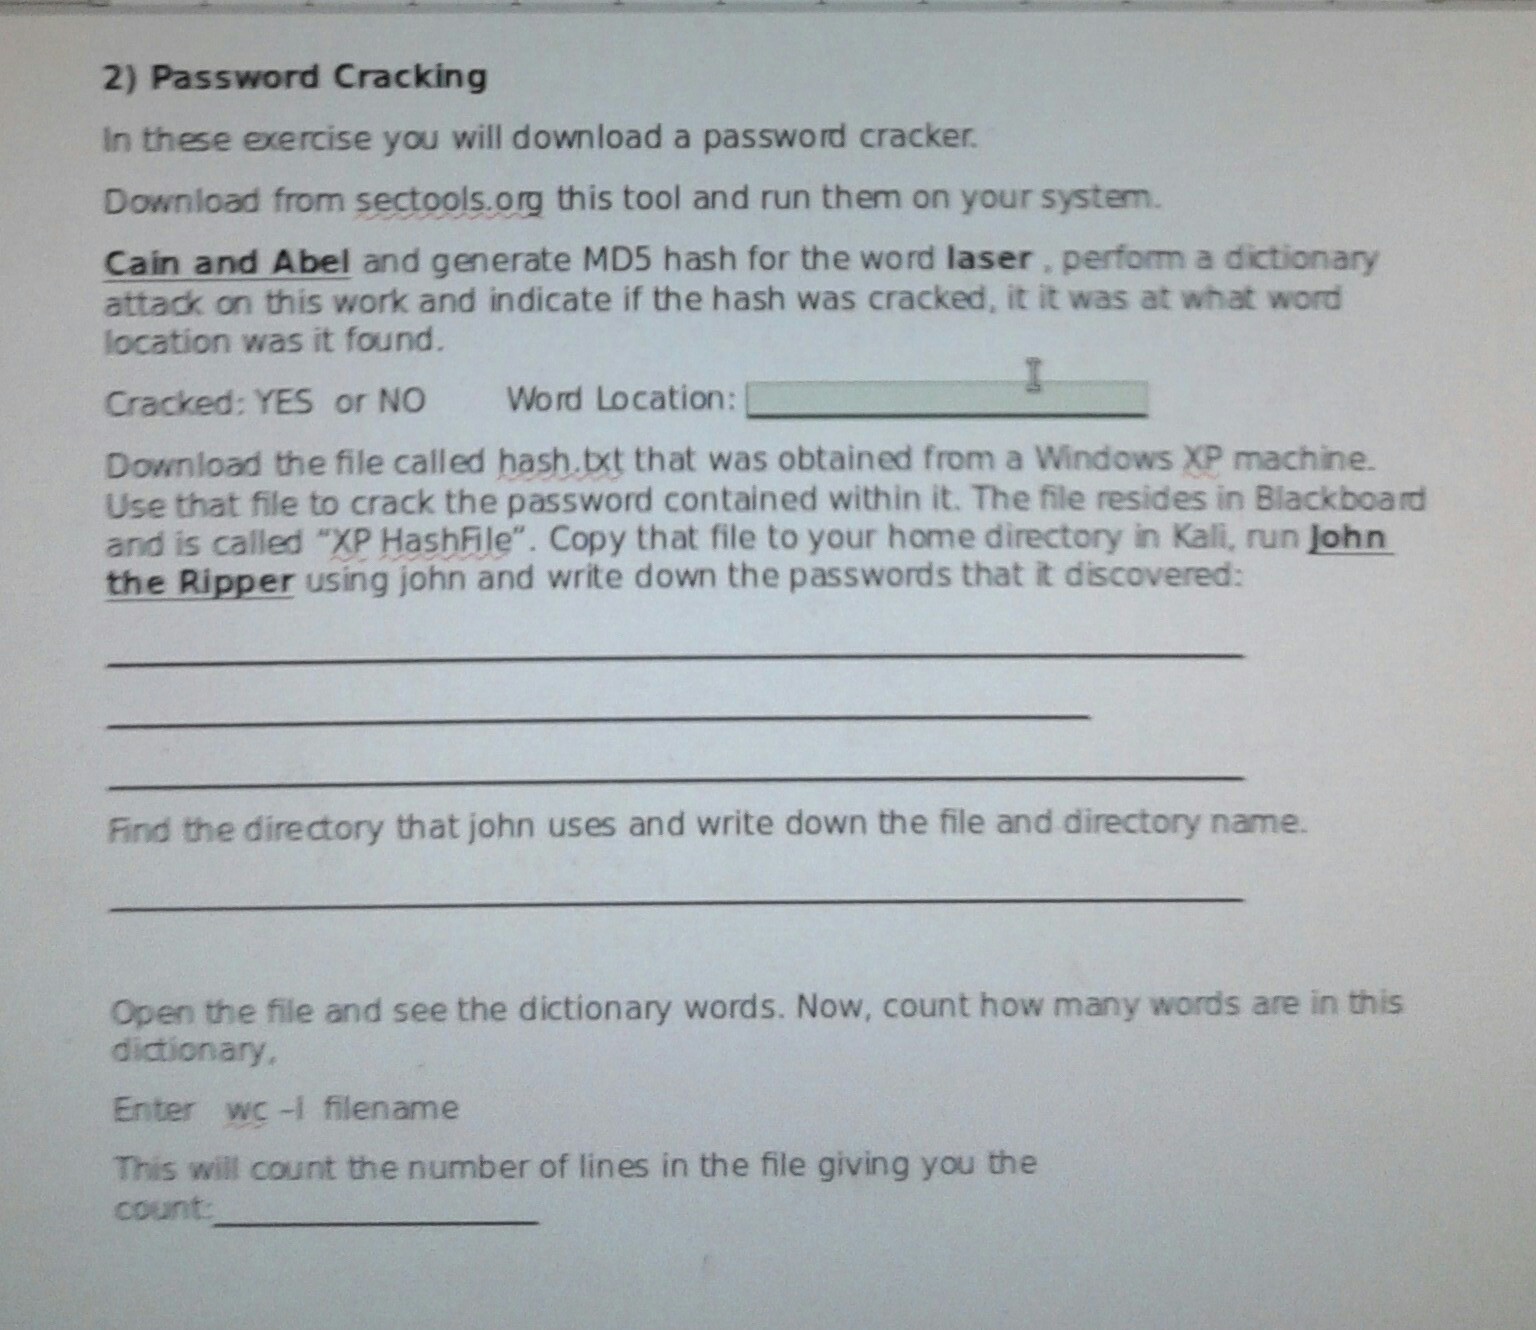 Solved 2 Password Cracking In These Exercise You Will Do